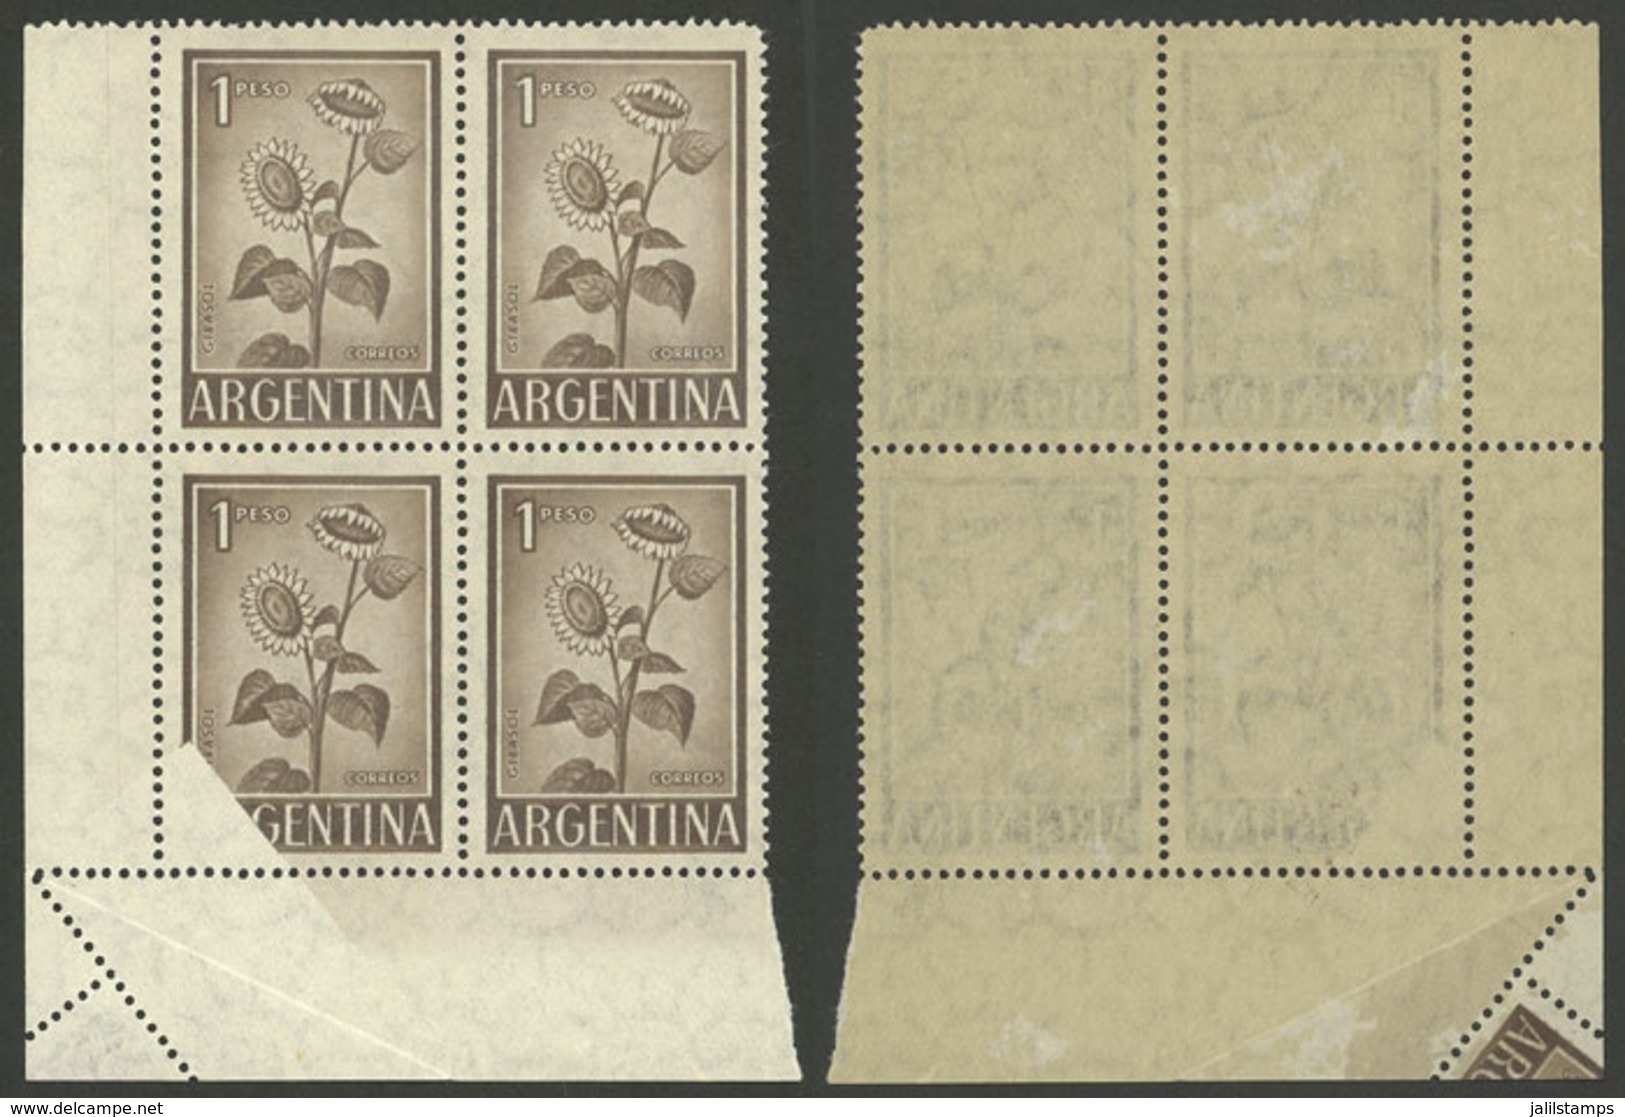 ARGENTINA: GJ.1128, 1P. Sunflower On National Unsurfaced Paper, Corner Block Of 4 With Attractive Printing And Perforati - Neufs